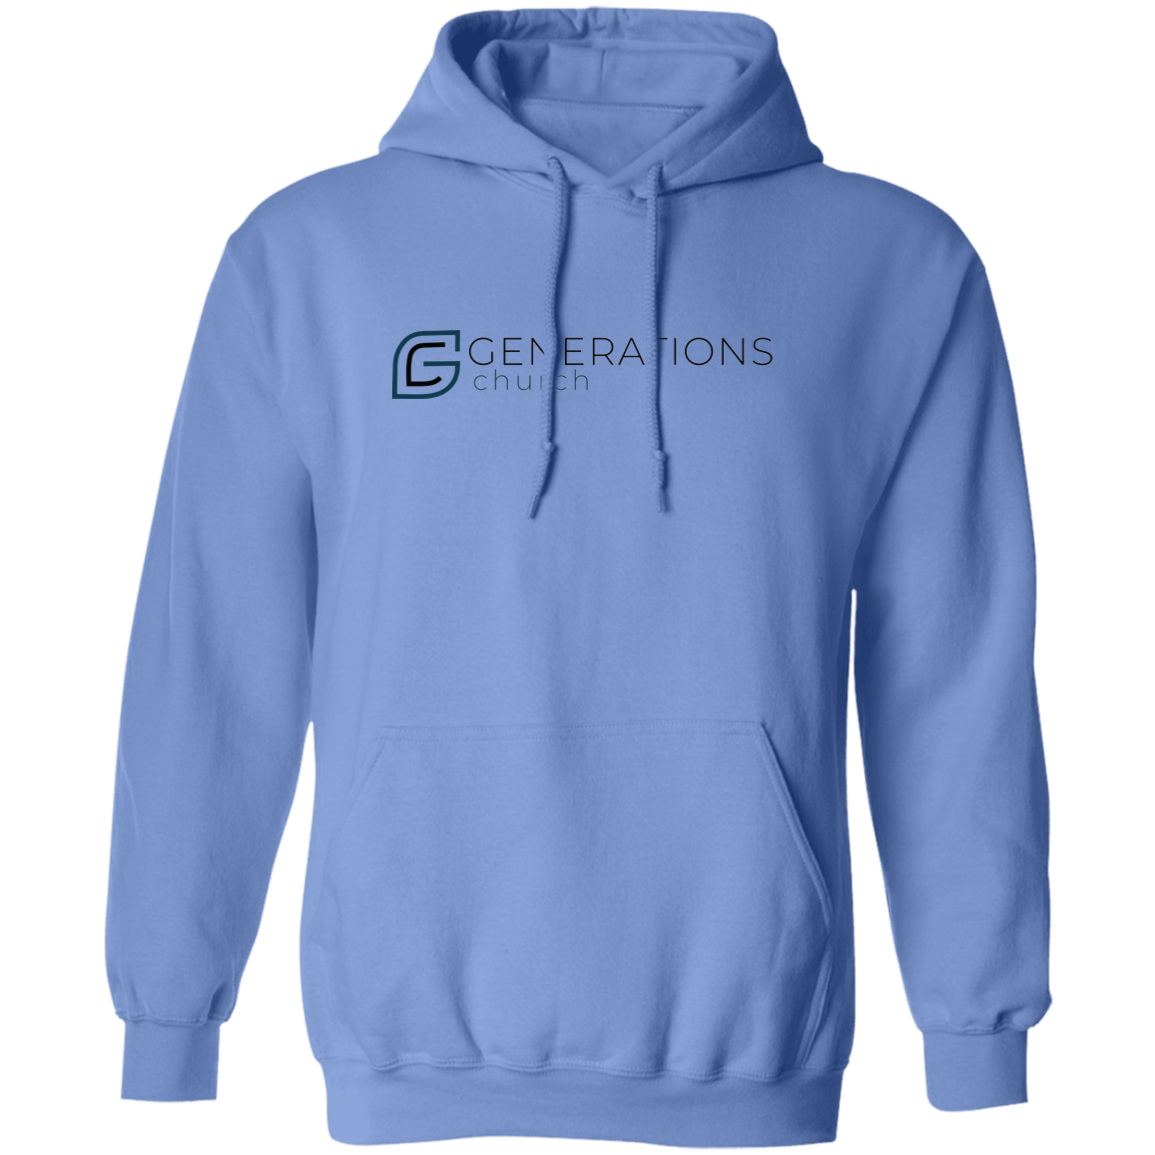 Generations Church - Pullover Hoodie